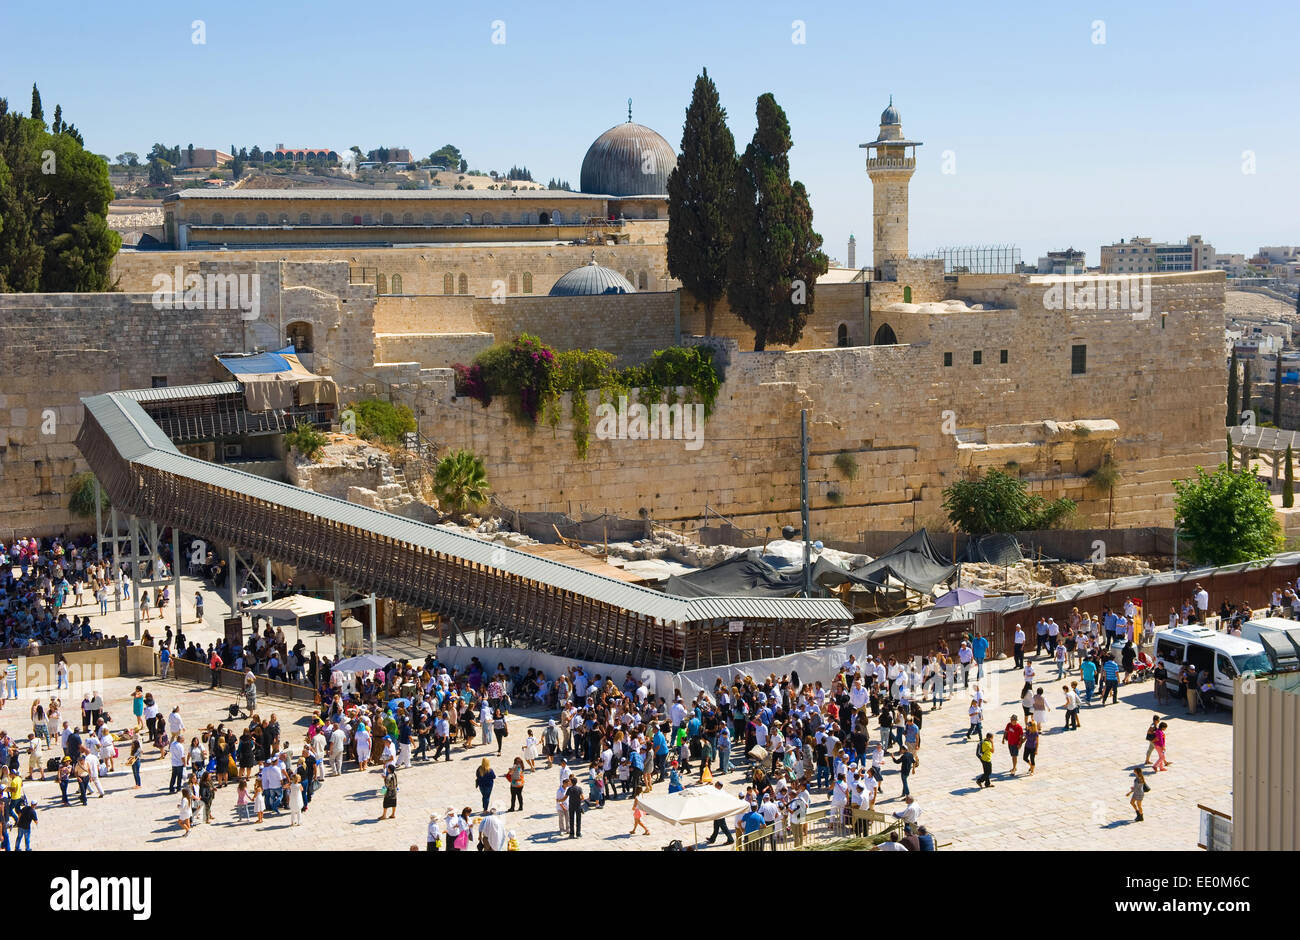 JERUSALEM, ISRAEL - OCT 06, 2014: 'The Mugrabi entrance' is the only entrance for non-muslims to visit the temple mount. On the Stock Photo